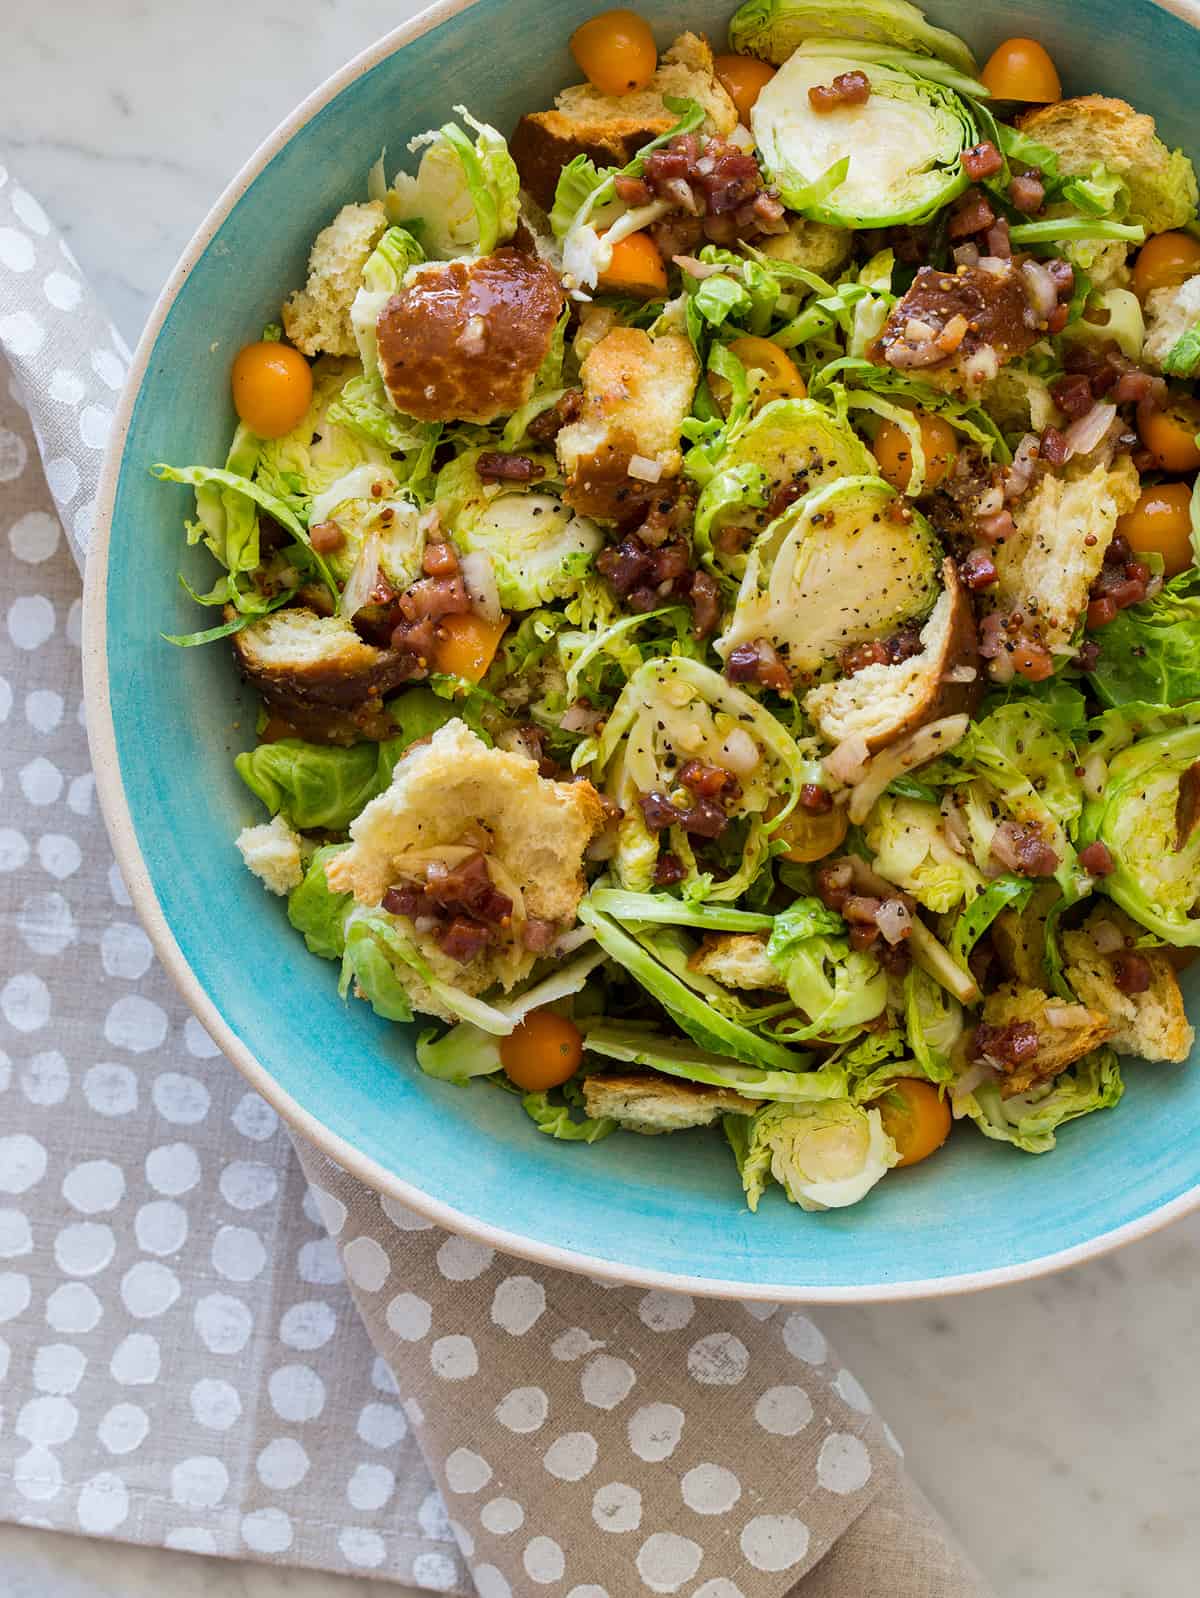 Shaved brussels sprouts salad in a blue bowl.